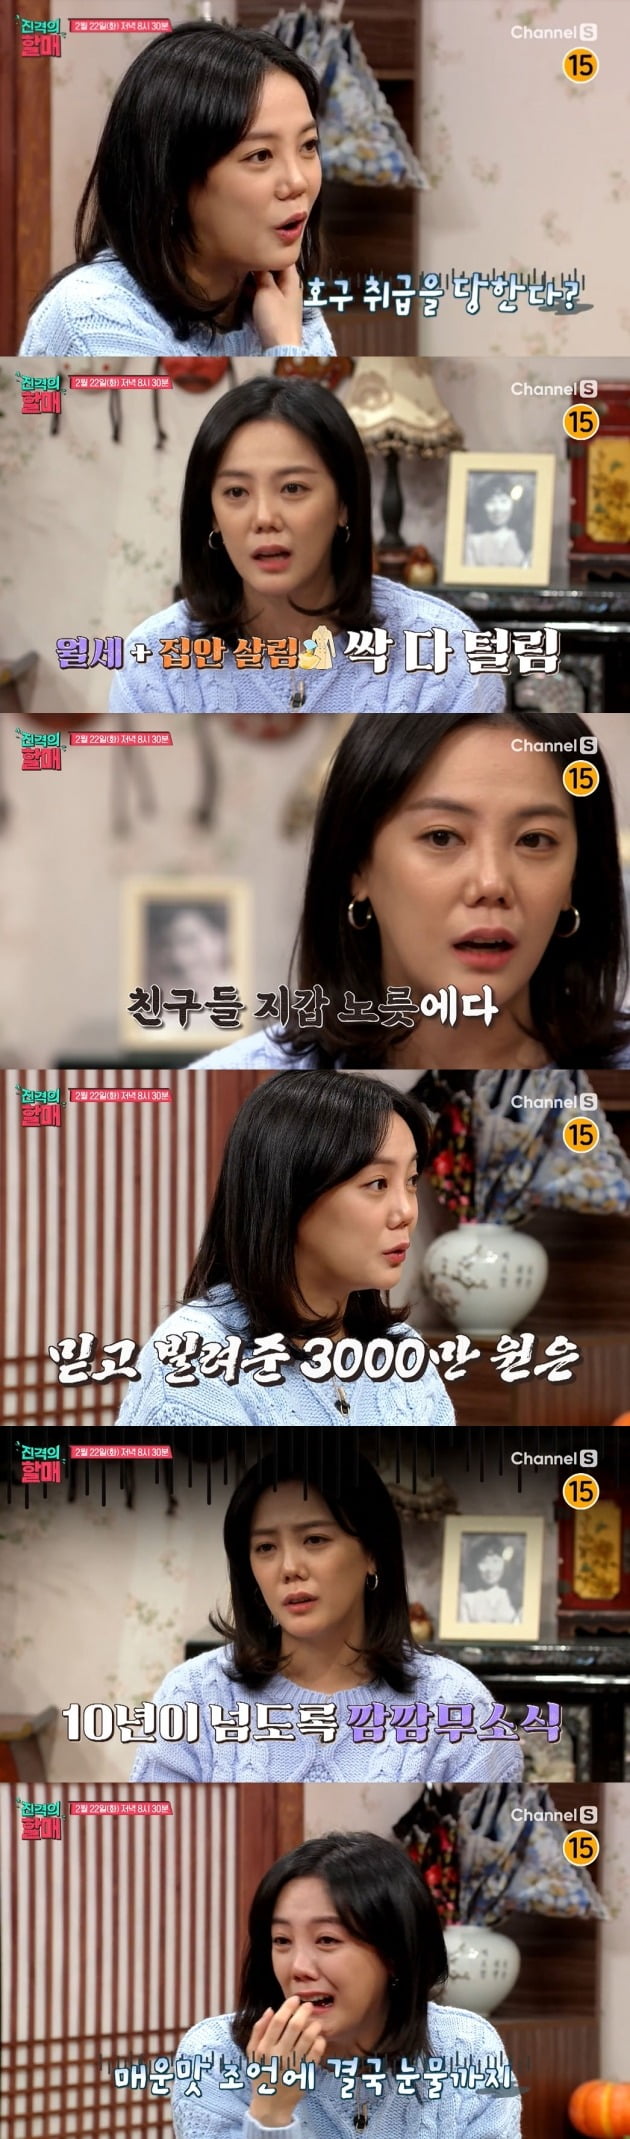 Actor Go Eun-ah has Disclosured that he was robbed of rent, cosmetics and camcorders by a former celebrity colleague.Go Eun-ah has previously told her senior about her experience of being damaged by back-to-back conversations.It was also a disclosure that shows that patience is not a virtue, but it also raises concerns that speculation and criticism against a specific person will be poured out.Go Eun-ah appeared on Channel S The Half of the Advance broadcast on the 22nd and talked about his worries about human relations.Go Eun-ah told Na Moon-hee, Kim Young-ok and Park Jung-soo, It seems to be because of the many passions.I see people who believe in it very much.  I am worried because I am hurt and I am treated a lot. Go Eun-ah, who made his debut at the age of 17, confided in his experience of betrayal to his senior who was close enough to go home to each other.Go Eun-ah said: One day I was going home after filming and I had a claw missing, I called my sister to come.My sister came and when I was taken to 119 rescue teams, I did not come out and I just walked out. I came back after treatment, but there was no rent on the bed.I called her, but she said she hadnt seen her. The 119 rescuers wouldnt have taken the money while they were taking me out.I was afraid that I would lose my sister if I suspected her. Go Eun-ah surprised everyone by saying, One other day I came home from a CF abroad, but the tableware is still there, and cosmetics and clothes have been lost.The day I filmed with my sister, the company camcorder that took me to monitor me was gone. I talked to the company about it, and my company representative called my sister company representative.But I told her what she did to me, as if she had been beaten. This is not the first time Go Eun-ahs Disclosure has ever been made.In January 2020, he pinpointed the culture of the actors through his sister Mirs YouTube channel, saying that he had been taken away from the film in the past and had been booked for the film festival.Go Eun-ah said in a shooting of a new work, One day suddenly everyone started not to eat rice with me, and actors, staffs, and even the youngest staff looked at me up and down a little and avoided me. It does not matter in a day or two.I asked him, and he said that I was swearing at actors and talking about the staff. The actress was a breakup.Go Eun-ah also told an anecdote that he lost his first dress to his senior in the awards ceremony dress contest.Go Eun-ah said, I fixed it first, so I had already repaired it to my body, but I suddenly took it away when I saw it.I could not say anything, and the staff could not say anything. In addition, about the culture of the country, This can not be changed like the law of clarity. Its going to keep going, he said, saddened.Go Eun-ah also revealed his experience of being treated unfairly, including assault and surveillance, by his former agency.Go Eun-ah said, I went to see a stylist and a movie after shooting, and I reported to the company that someone had gone with a man.I put my cell phone on my desk without turning off, and I watched who was contacted. I also talked to the officetel security officer and watched the CCTV once a week.At dawn, the manager came and pressed the bell to see if he was really home. Go Eun-ahs Disclosure sometimes has positive effects of evoking false cultures or misbehavior, but it also risks being the epicenter of unfounded lust.The initial talk, which is not the subject to be criticized, can cause innocent Victims to be misunderstood by the wrong people.Go Eun-ahs disclosure is eventually criticized as a back-to-back conversation in front of you. It is no different from the actions of seniors in anecdotes that hurt him.Although he did not mention his real name, he sent out the Netizen Investigation Team by throwing keywords such as lovely image or association more than himself for the seniors of the thief anecdote.Courageous Confessions cheer but it seems necessary to refrain from public comments that could result in innocent Victims.